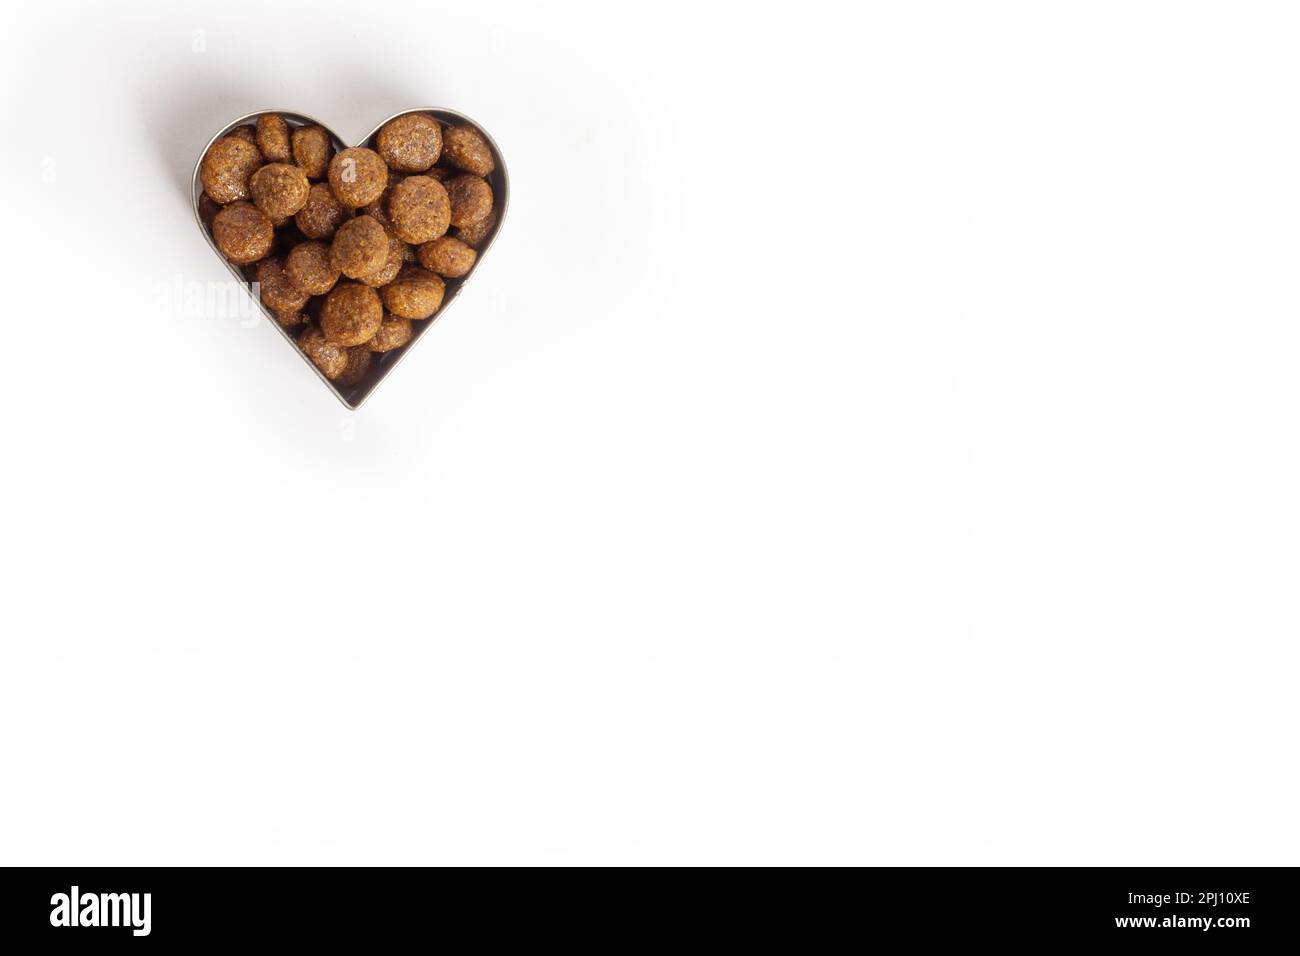 Dry pet food in the shape of a heart is isolated on a white background. Pellets of healthy food for dogs and cats. Taking care of pets. Healthy food f Stock Photo